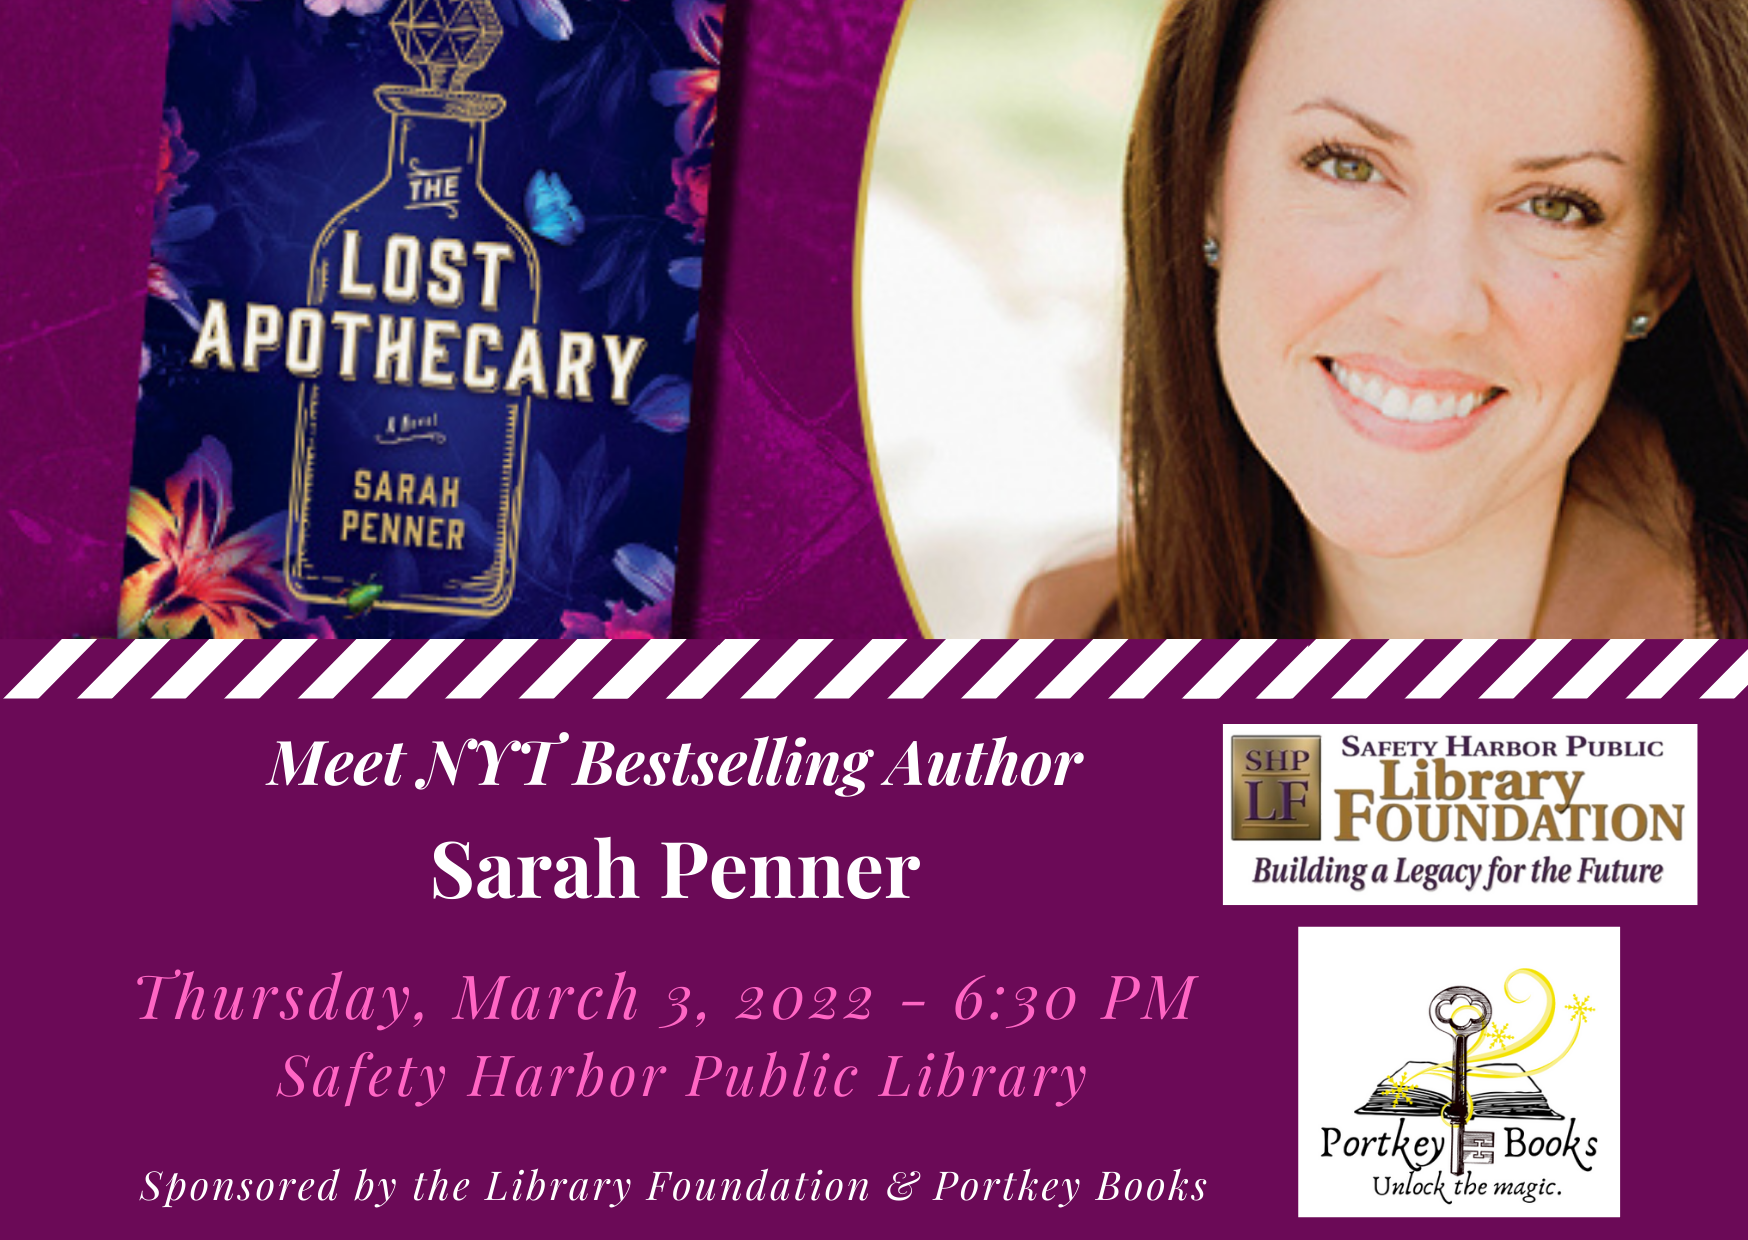 Author Sarah Penner at the SHPL - March 3, 2022 - 6:30 PM